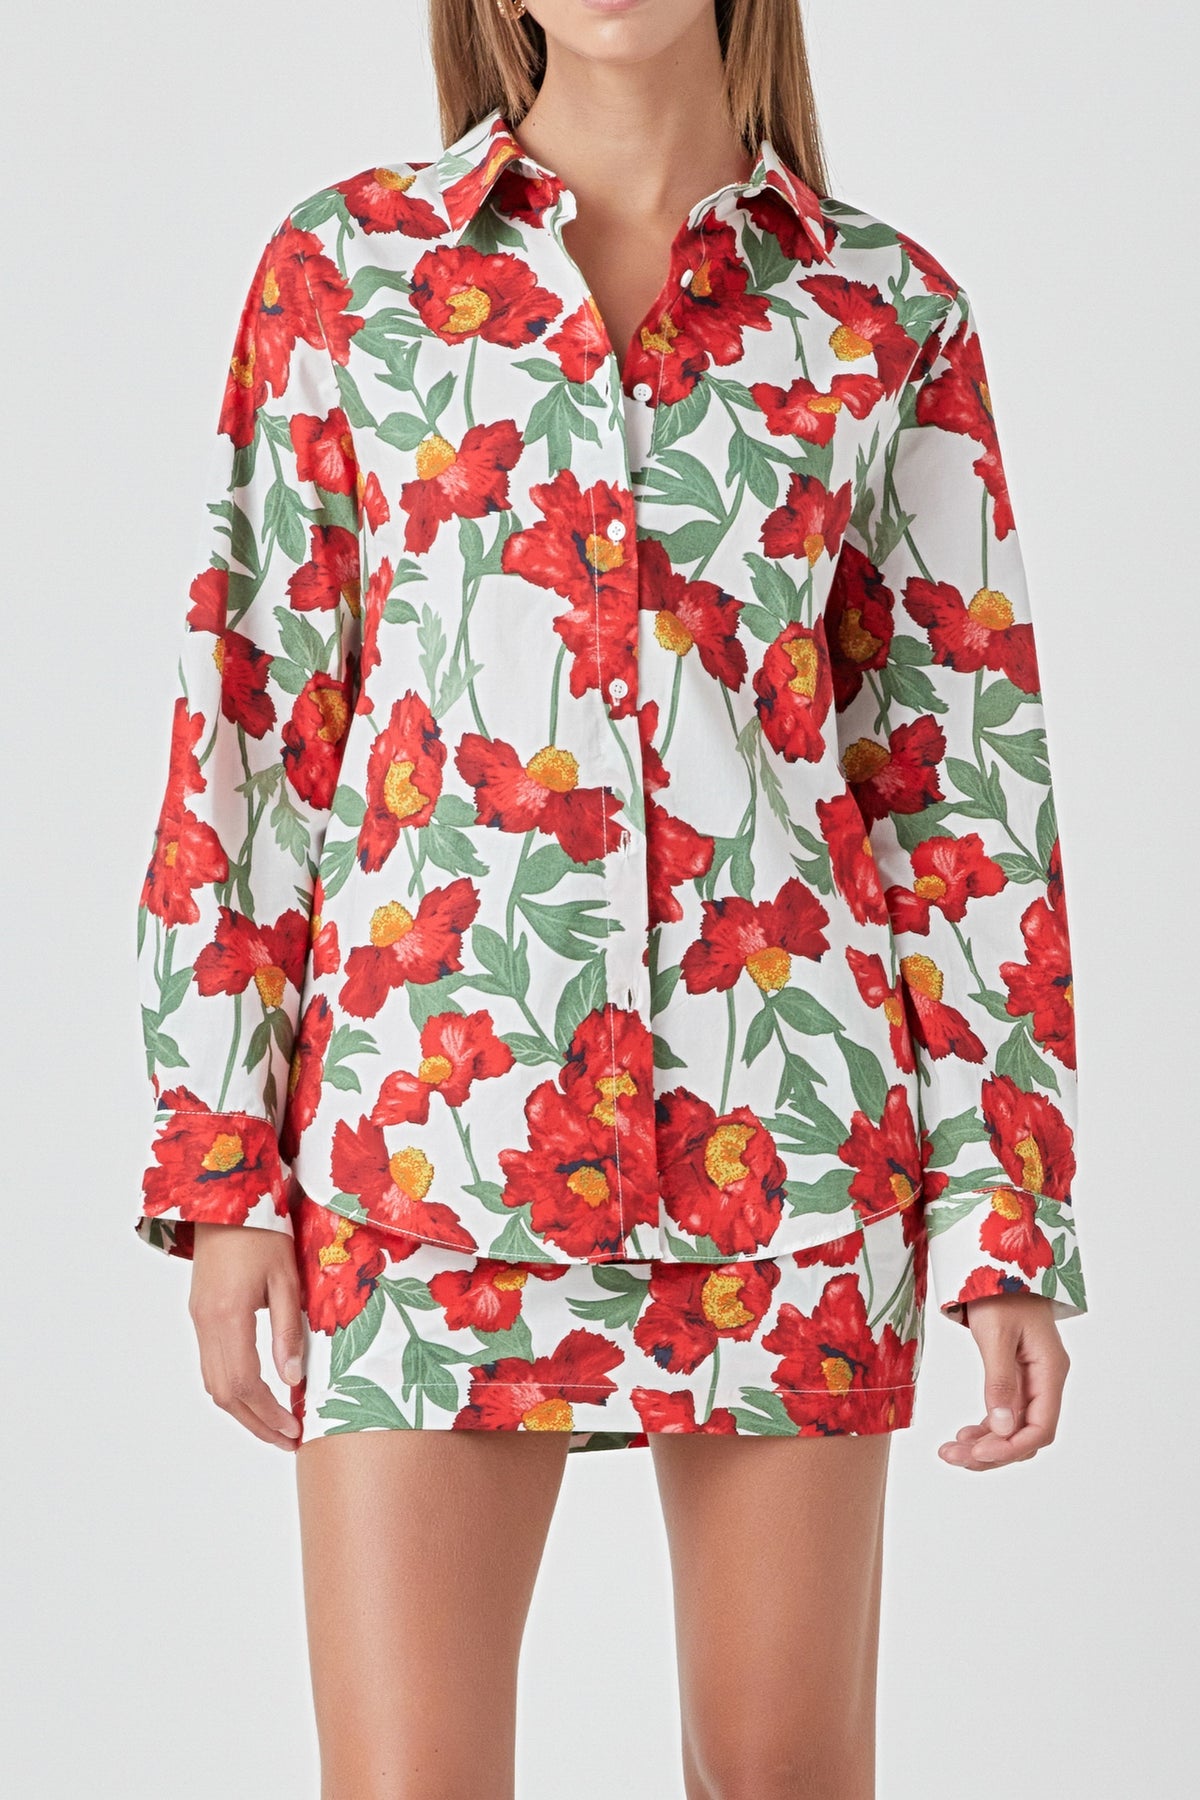 ENDLESS ROSE - Floral Print Cotton Shirt - SHIRTS & BLOUSES available at Objectrare